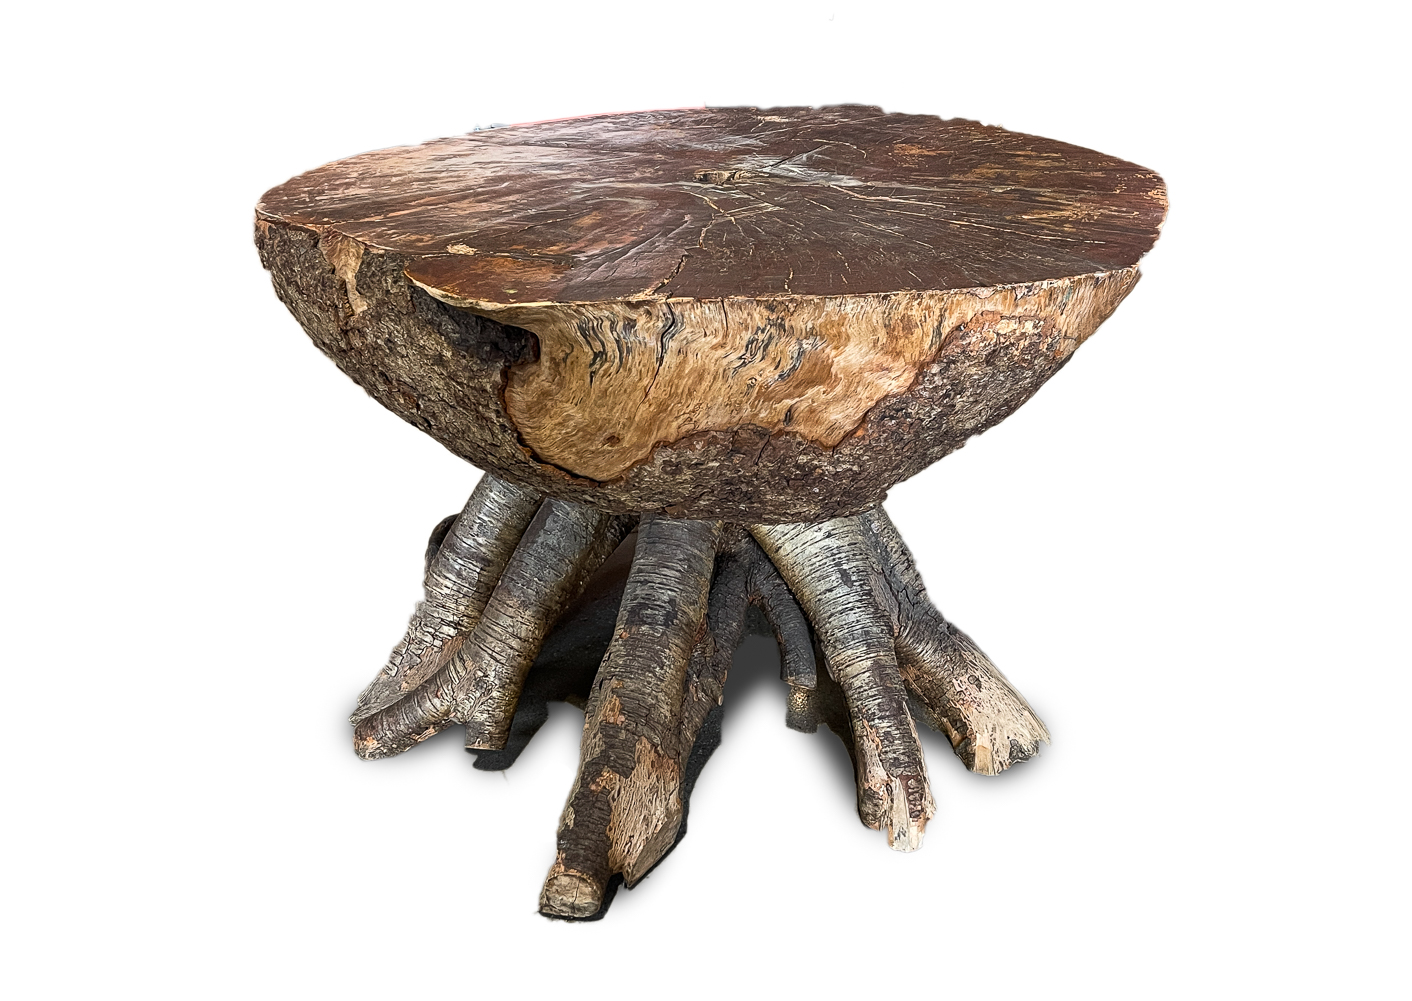 BURL AND ROOT TABLE FROM GREAT 2dfccd